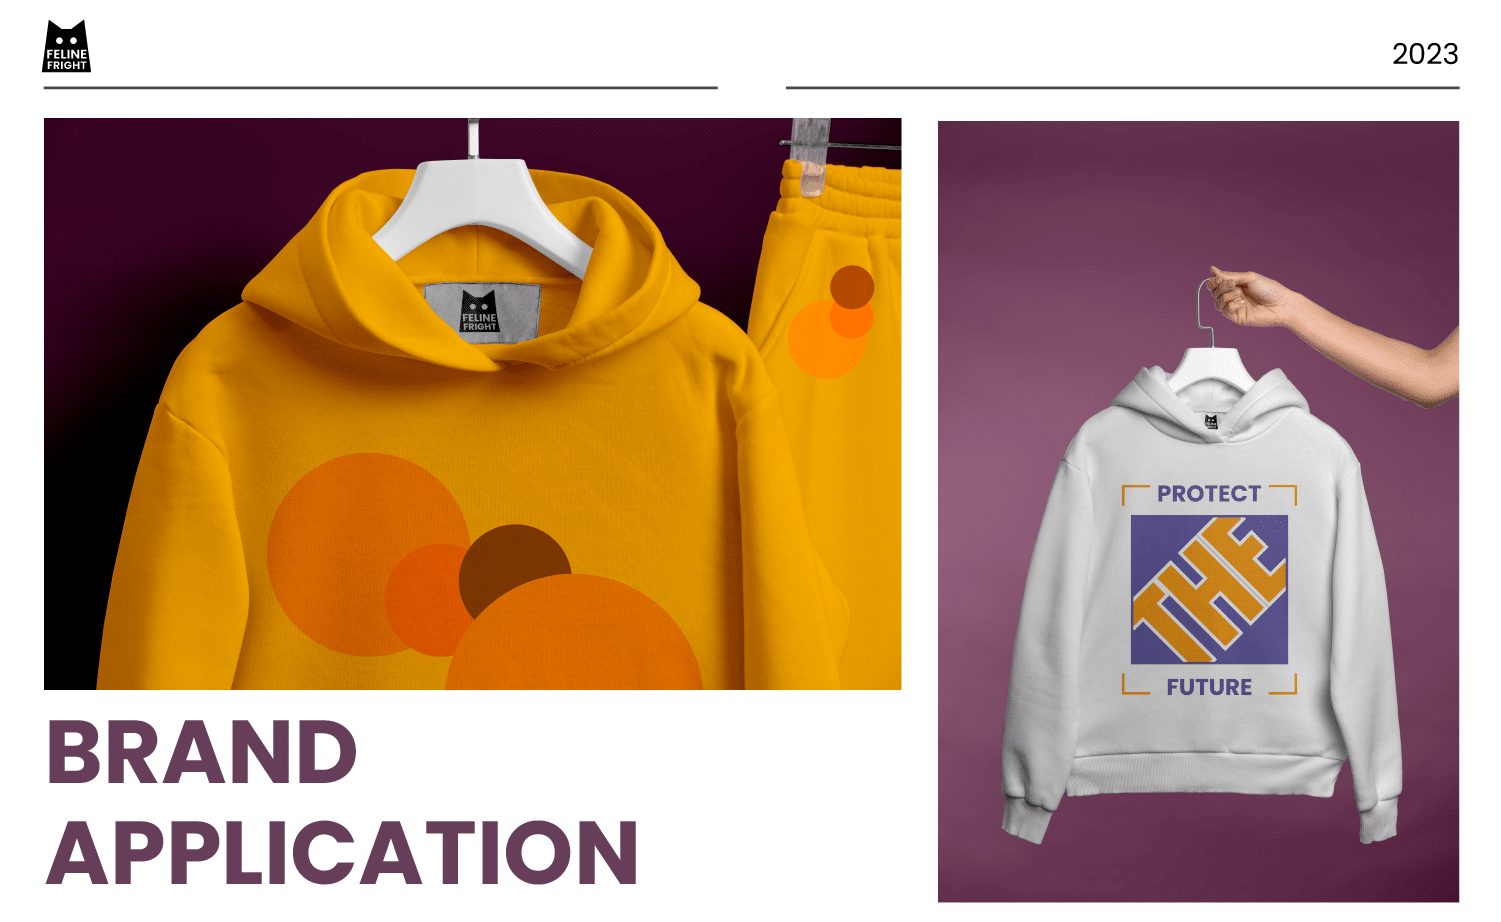 Orange and white hoodie images. Both have the Feline Fright logo sticking out.